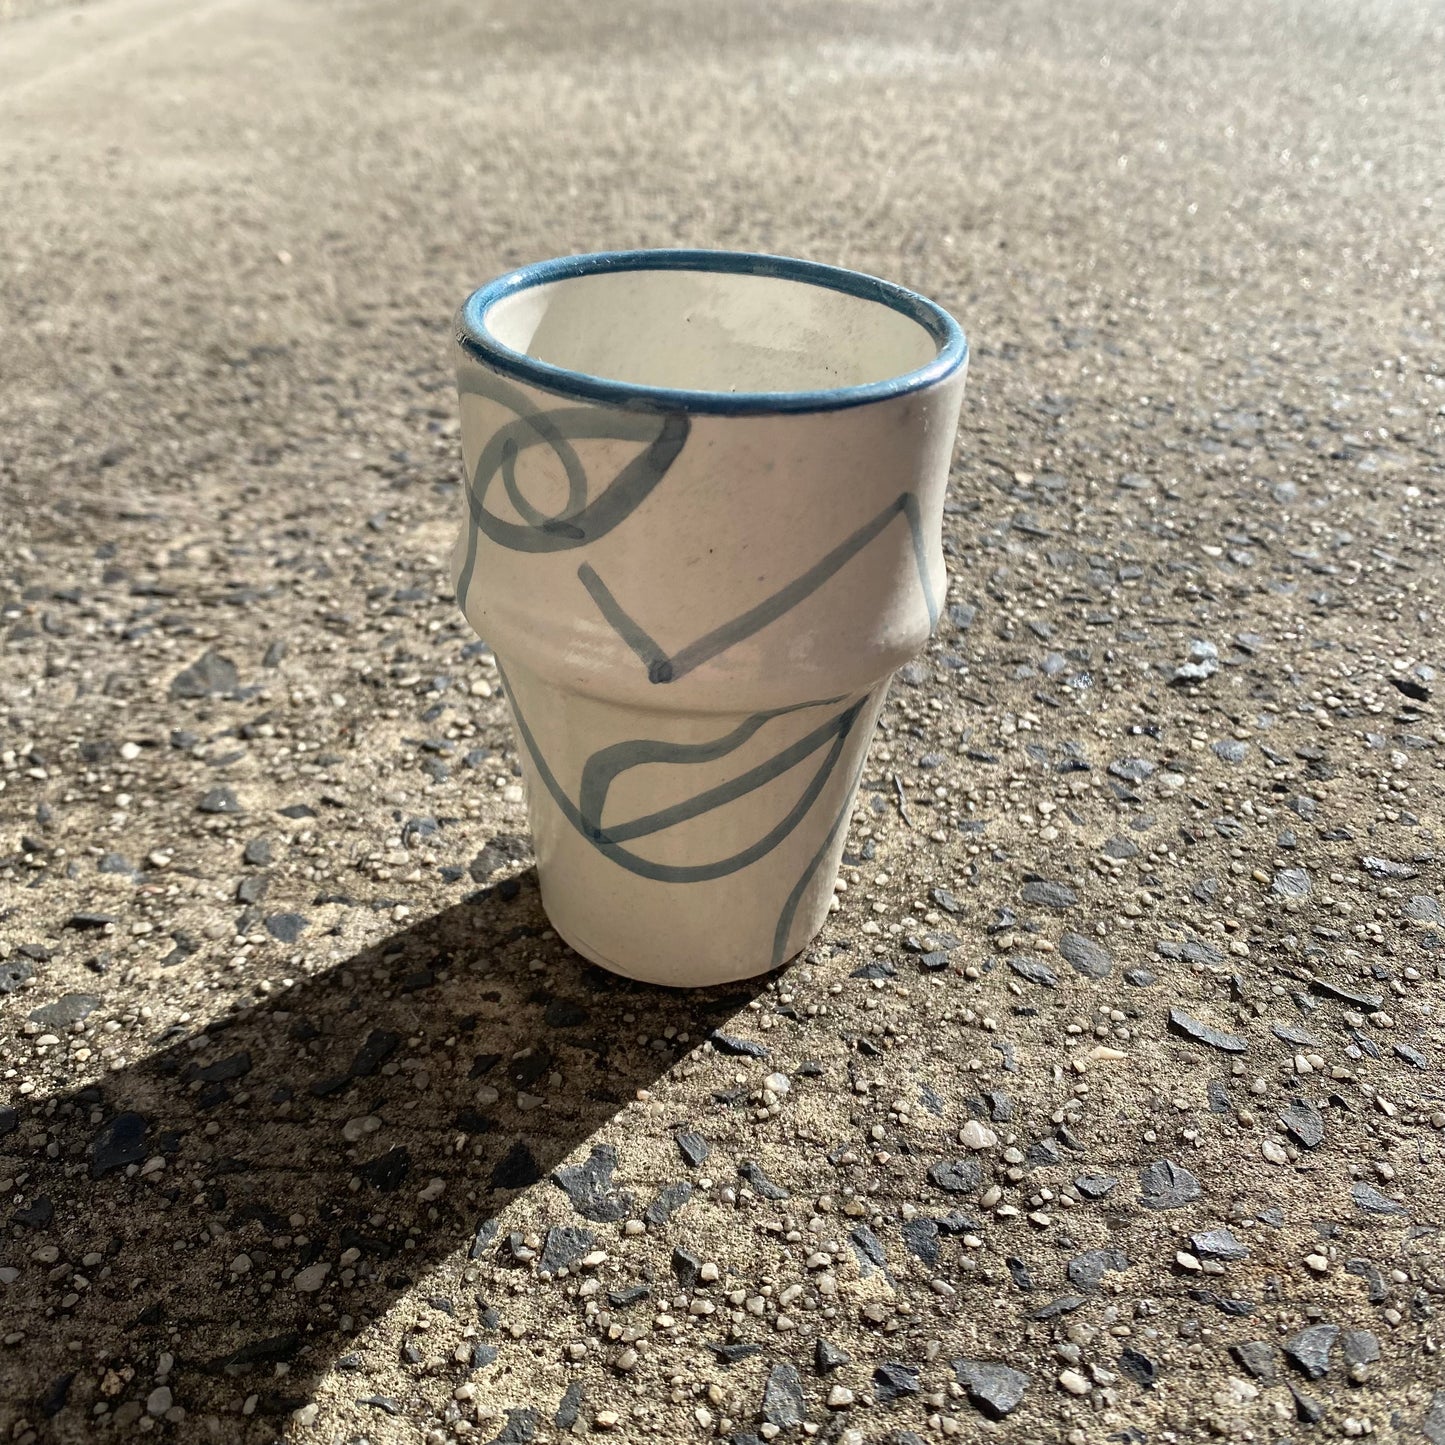 Hand Painted Decorative Cup - Faces